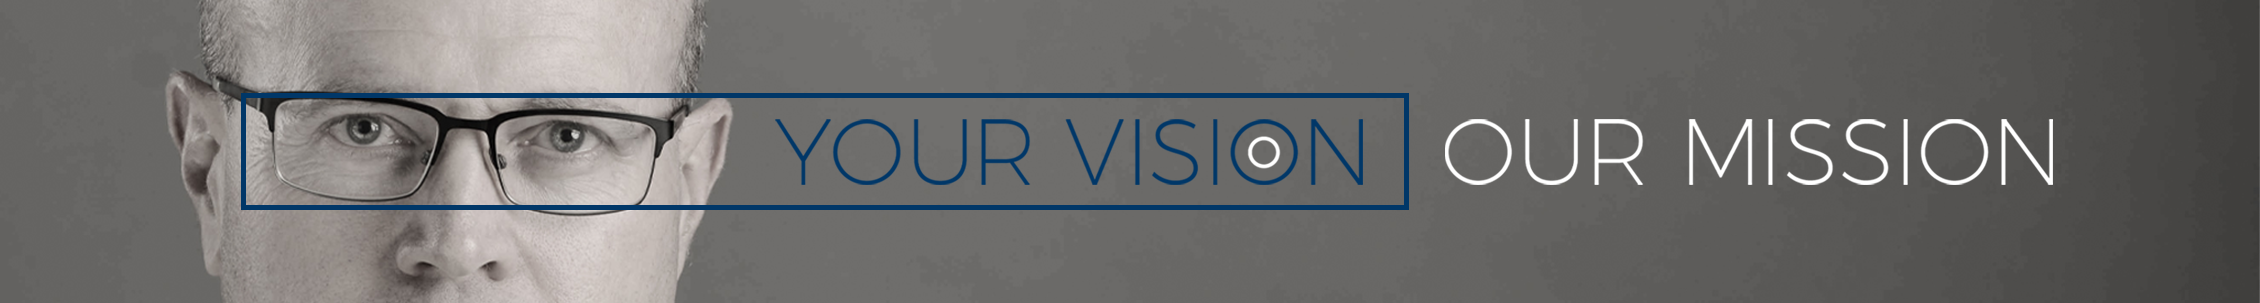 your vision, our mission